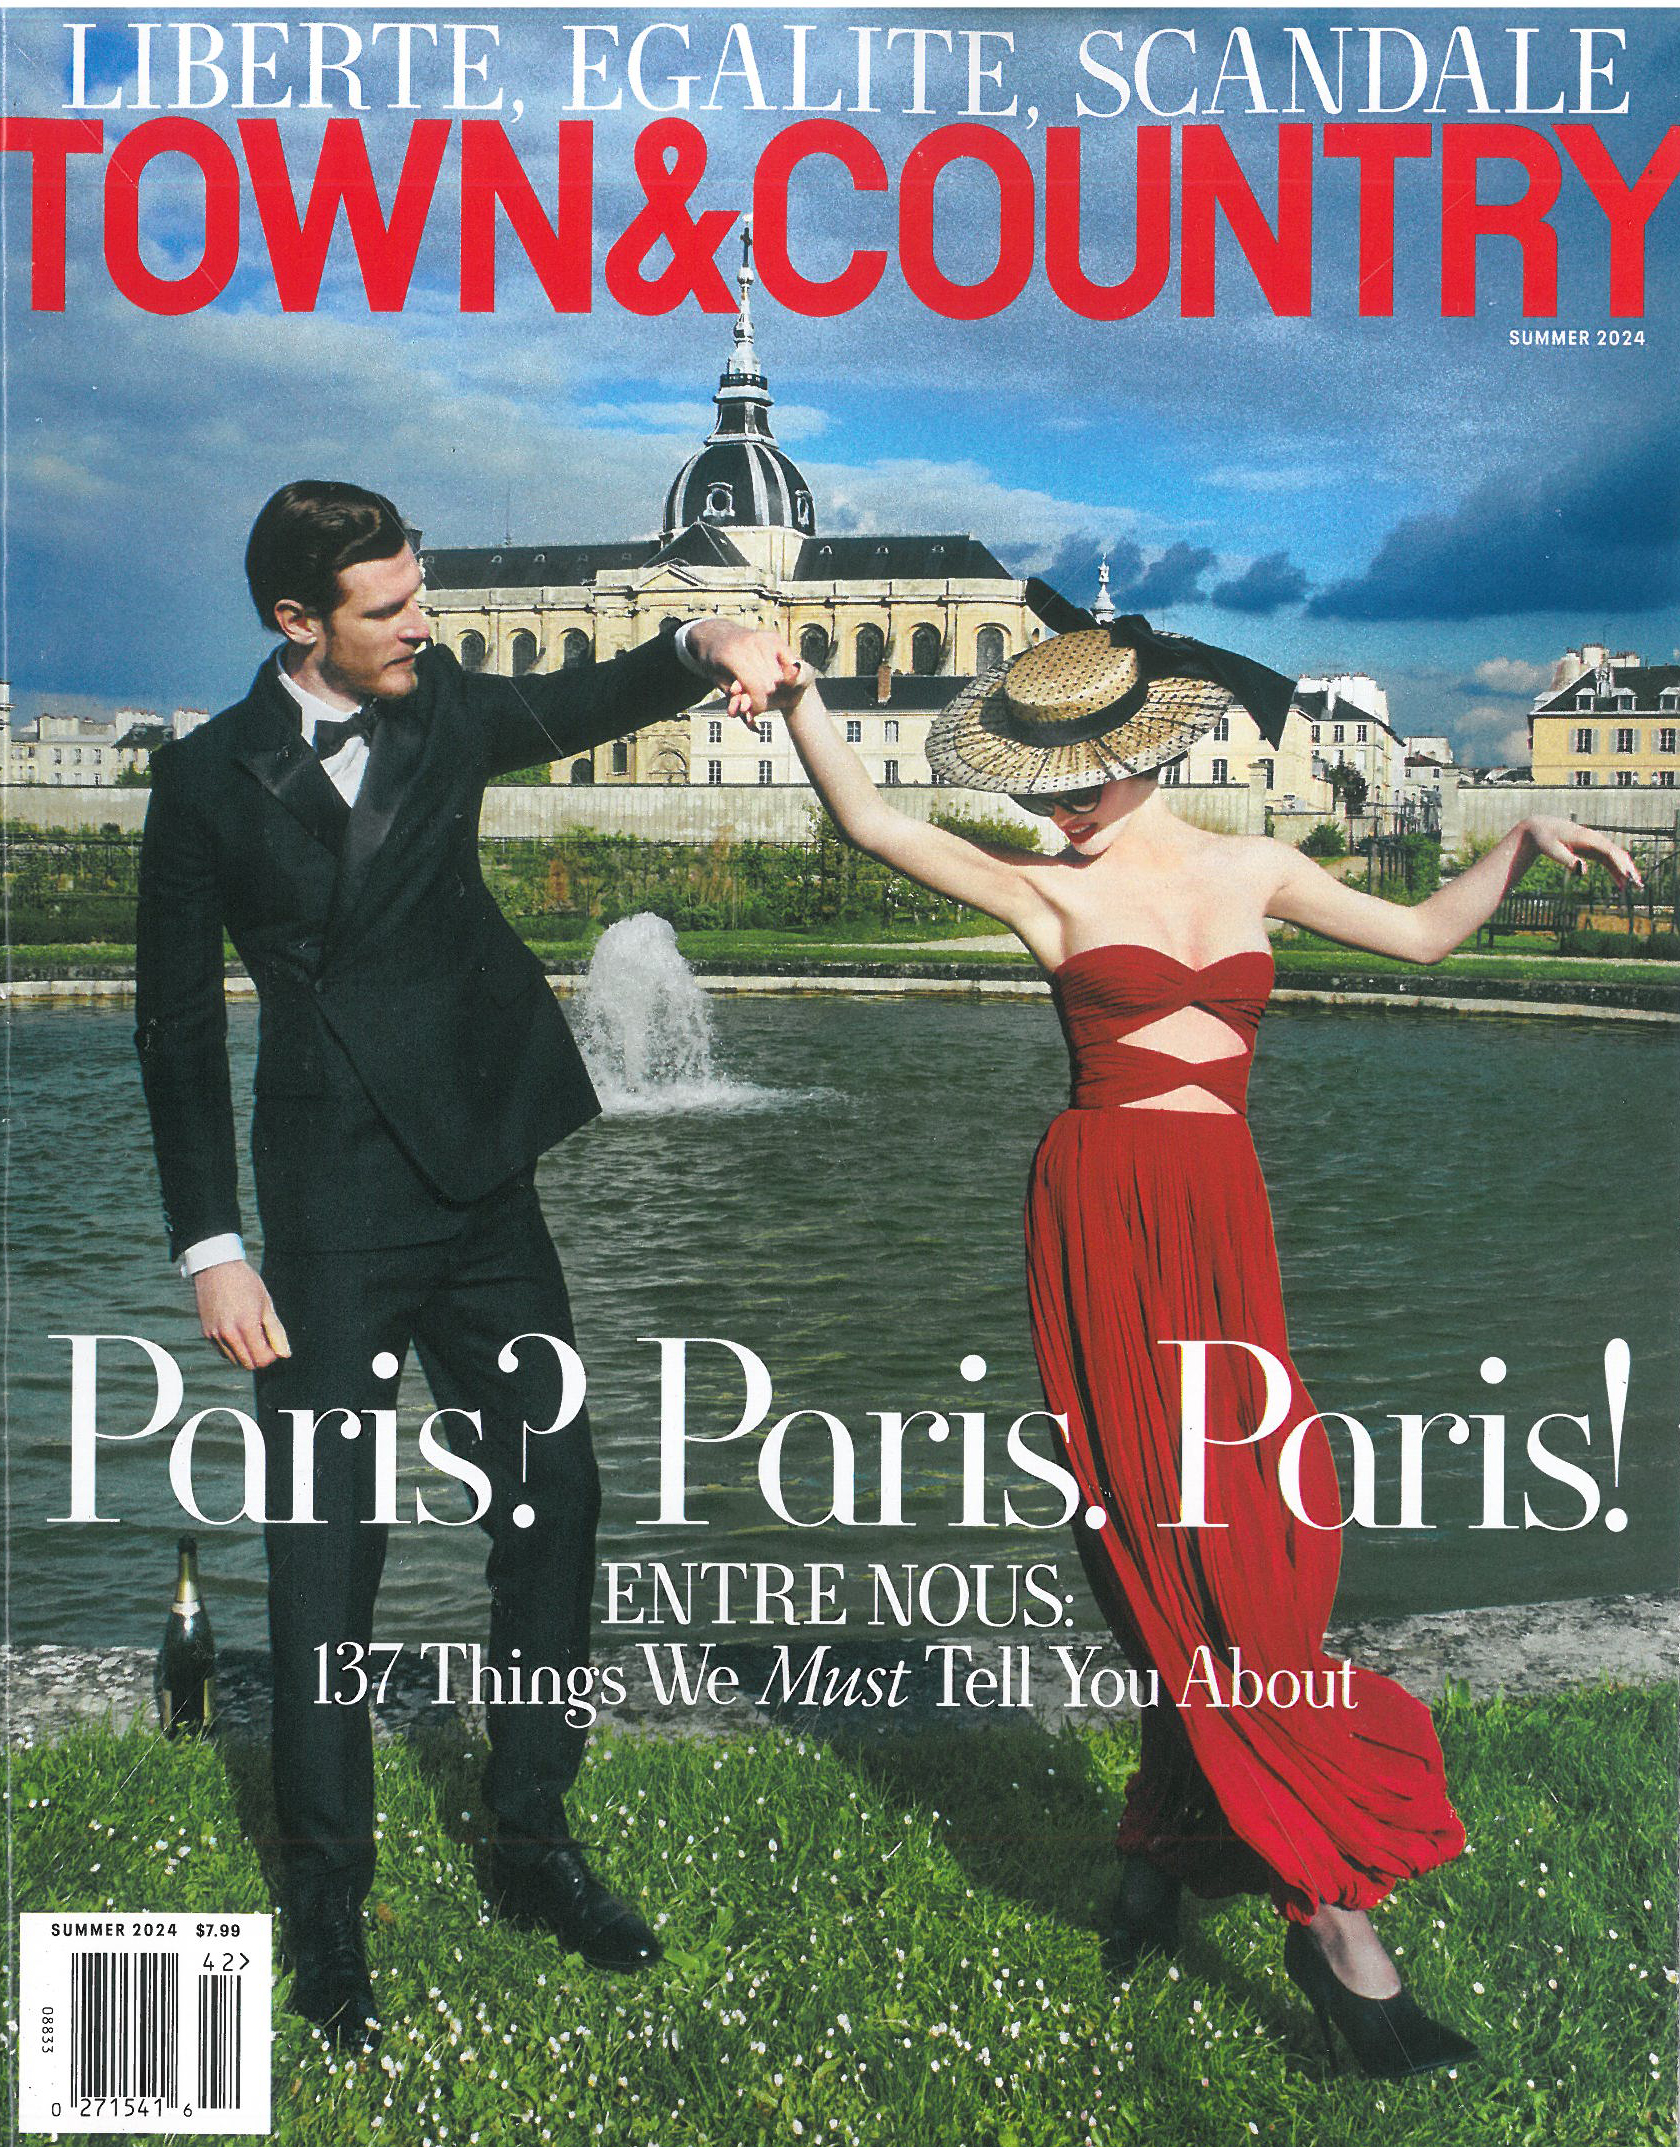 Town &amp; Country